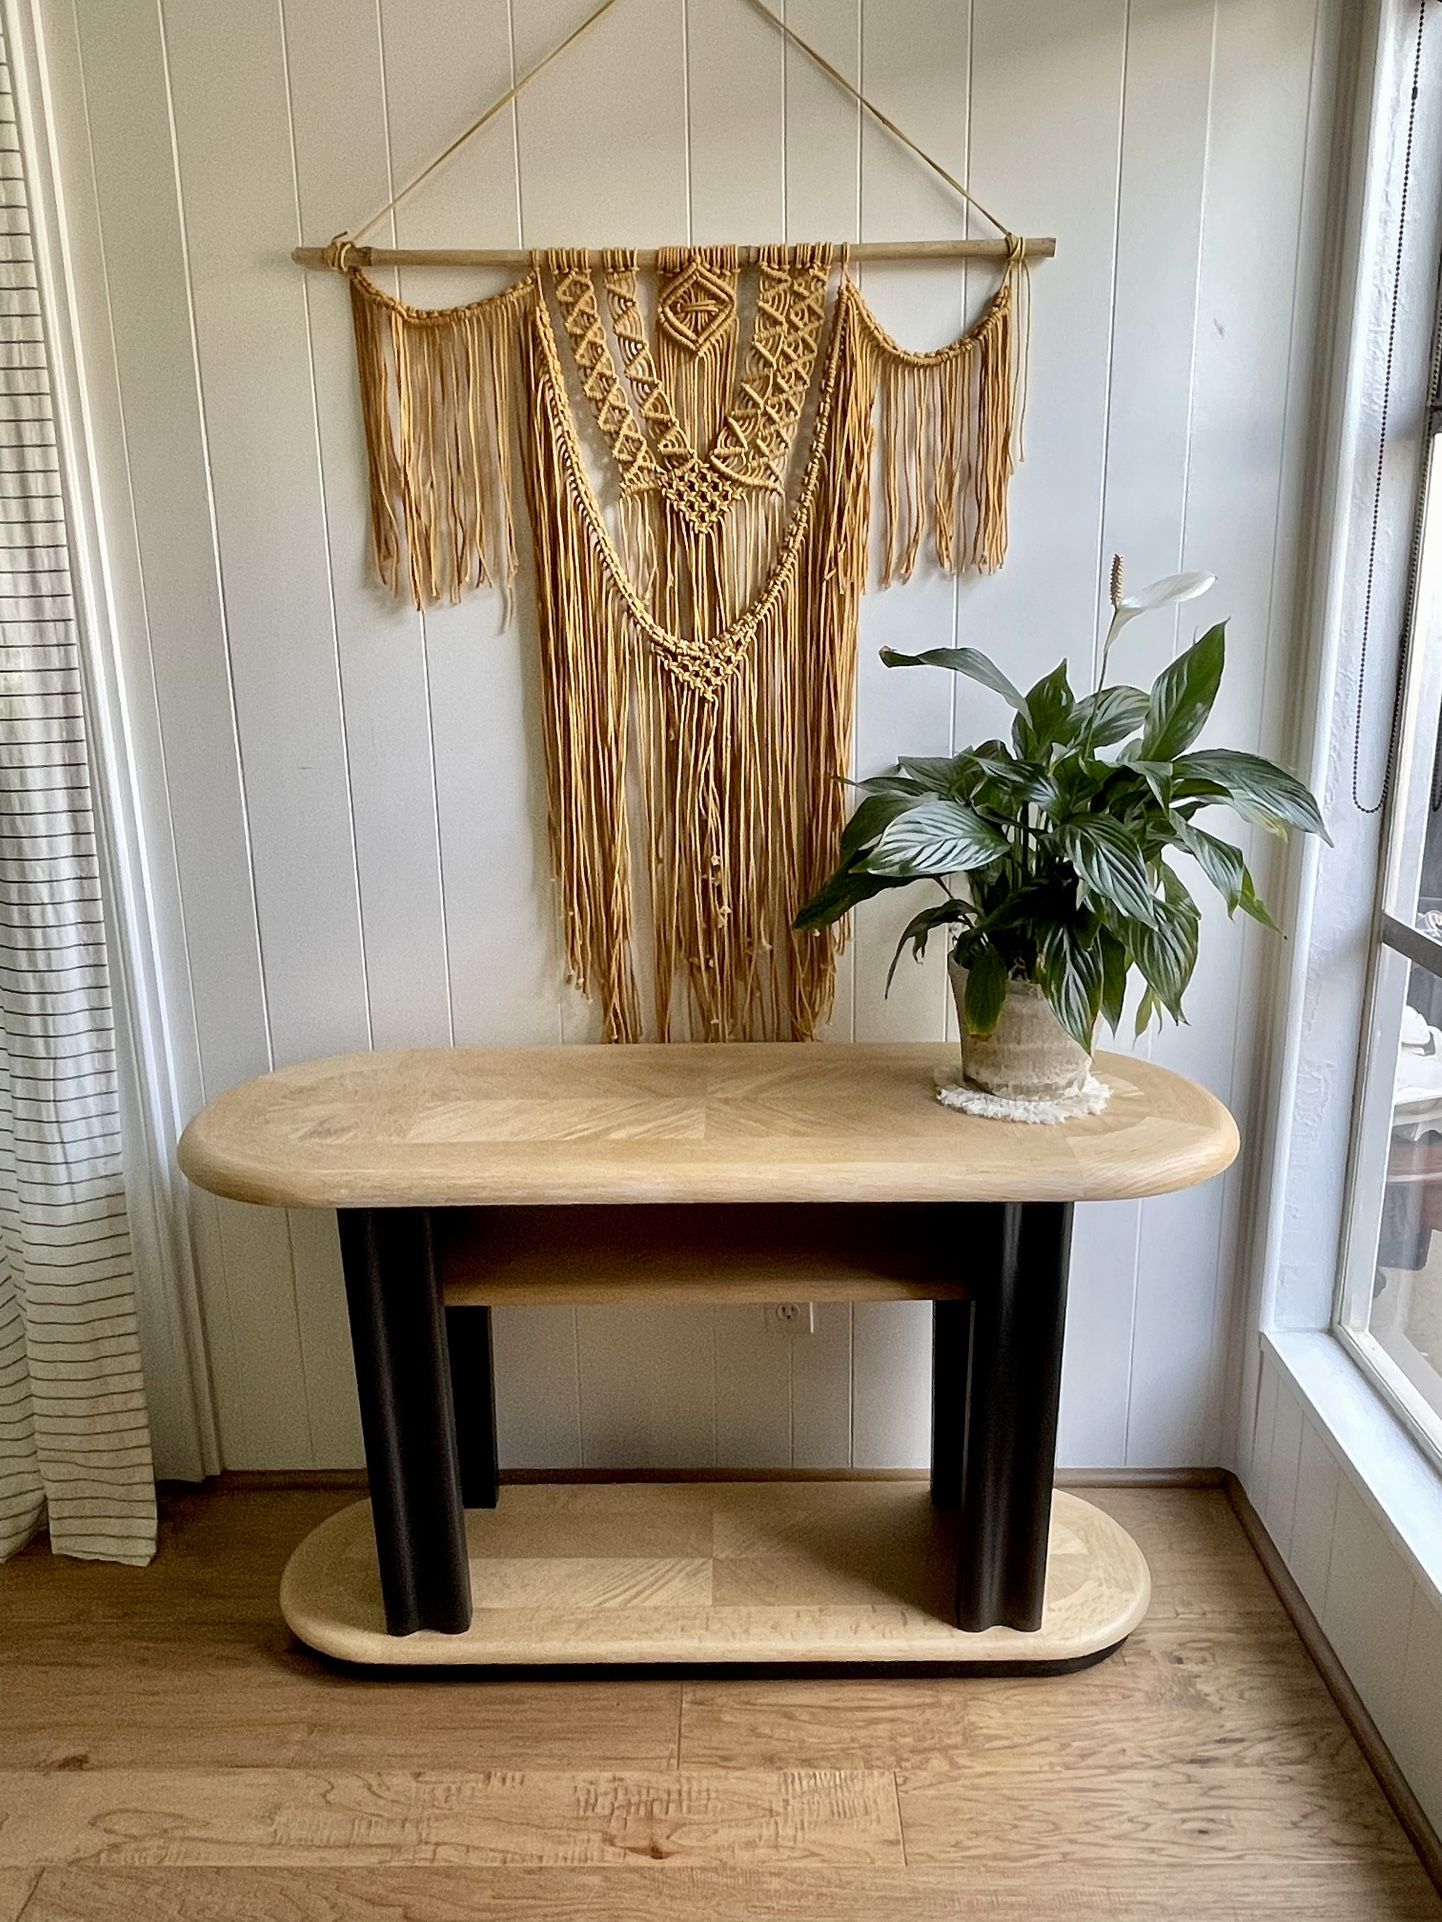 Refinished Entryway/console Table